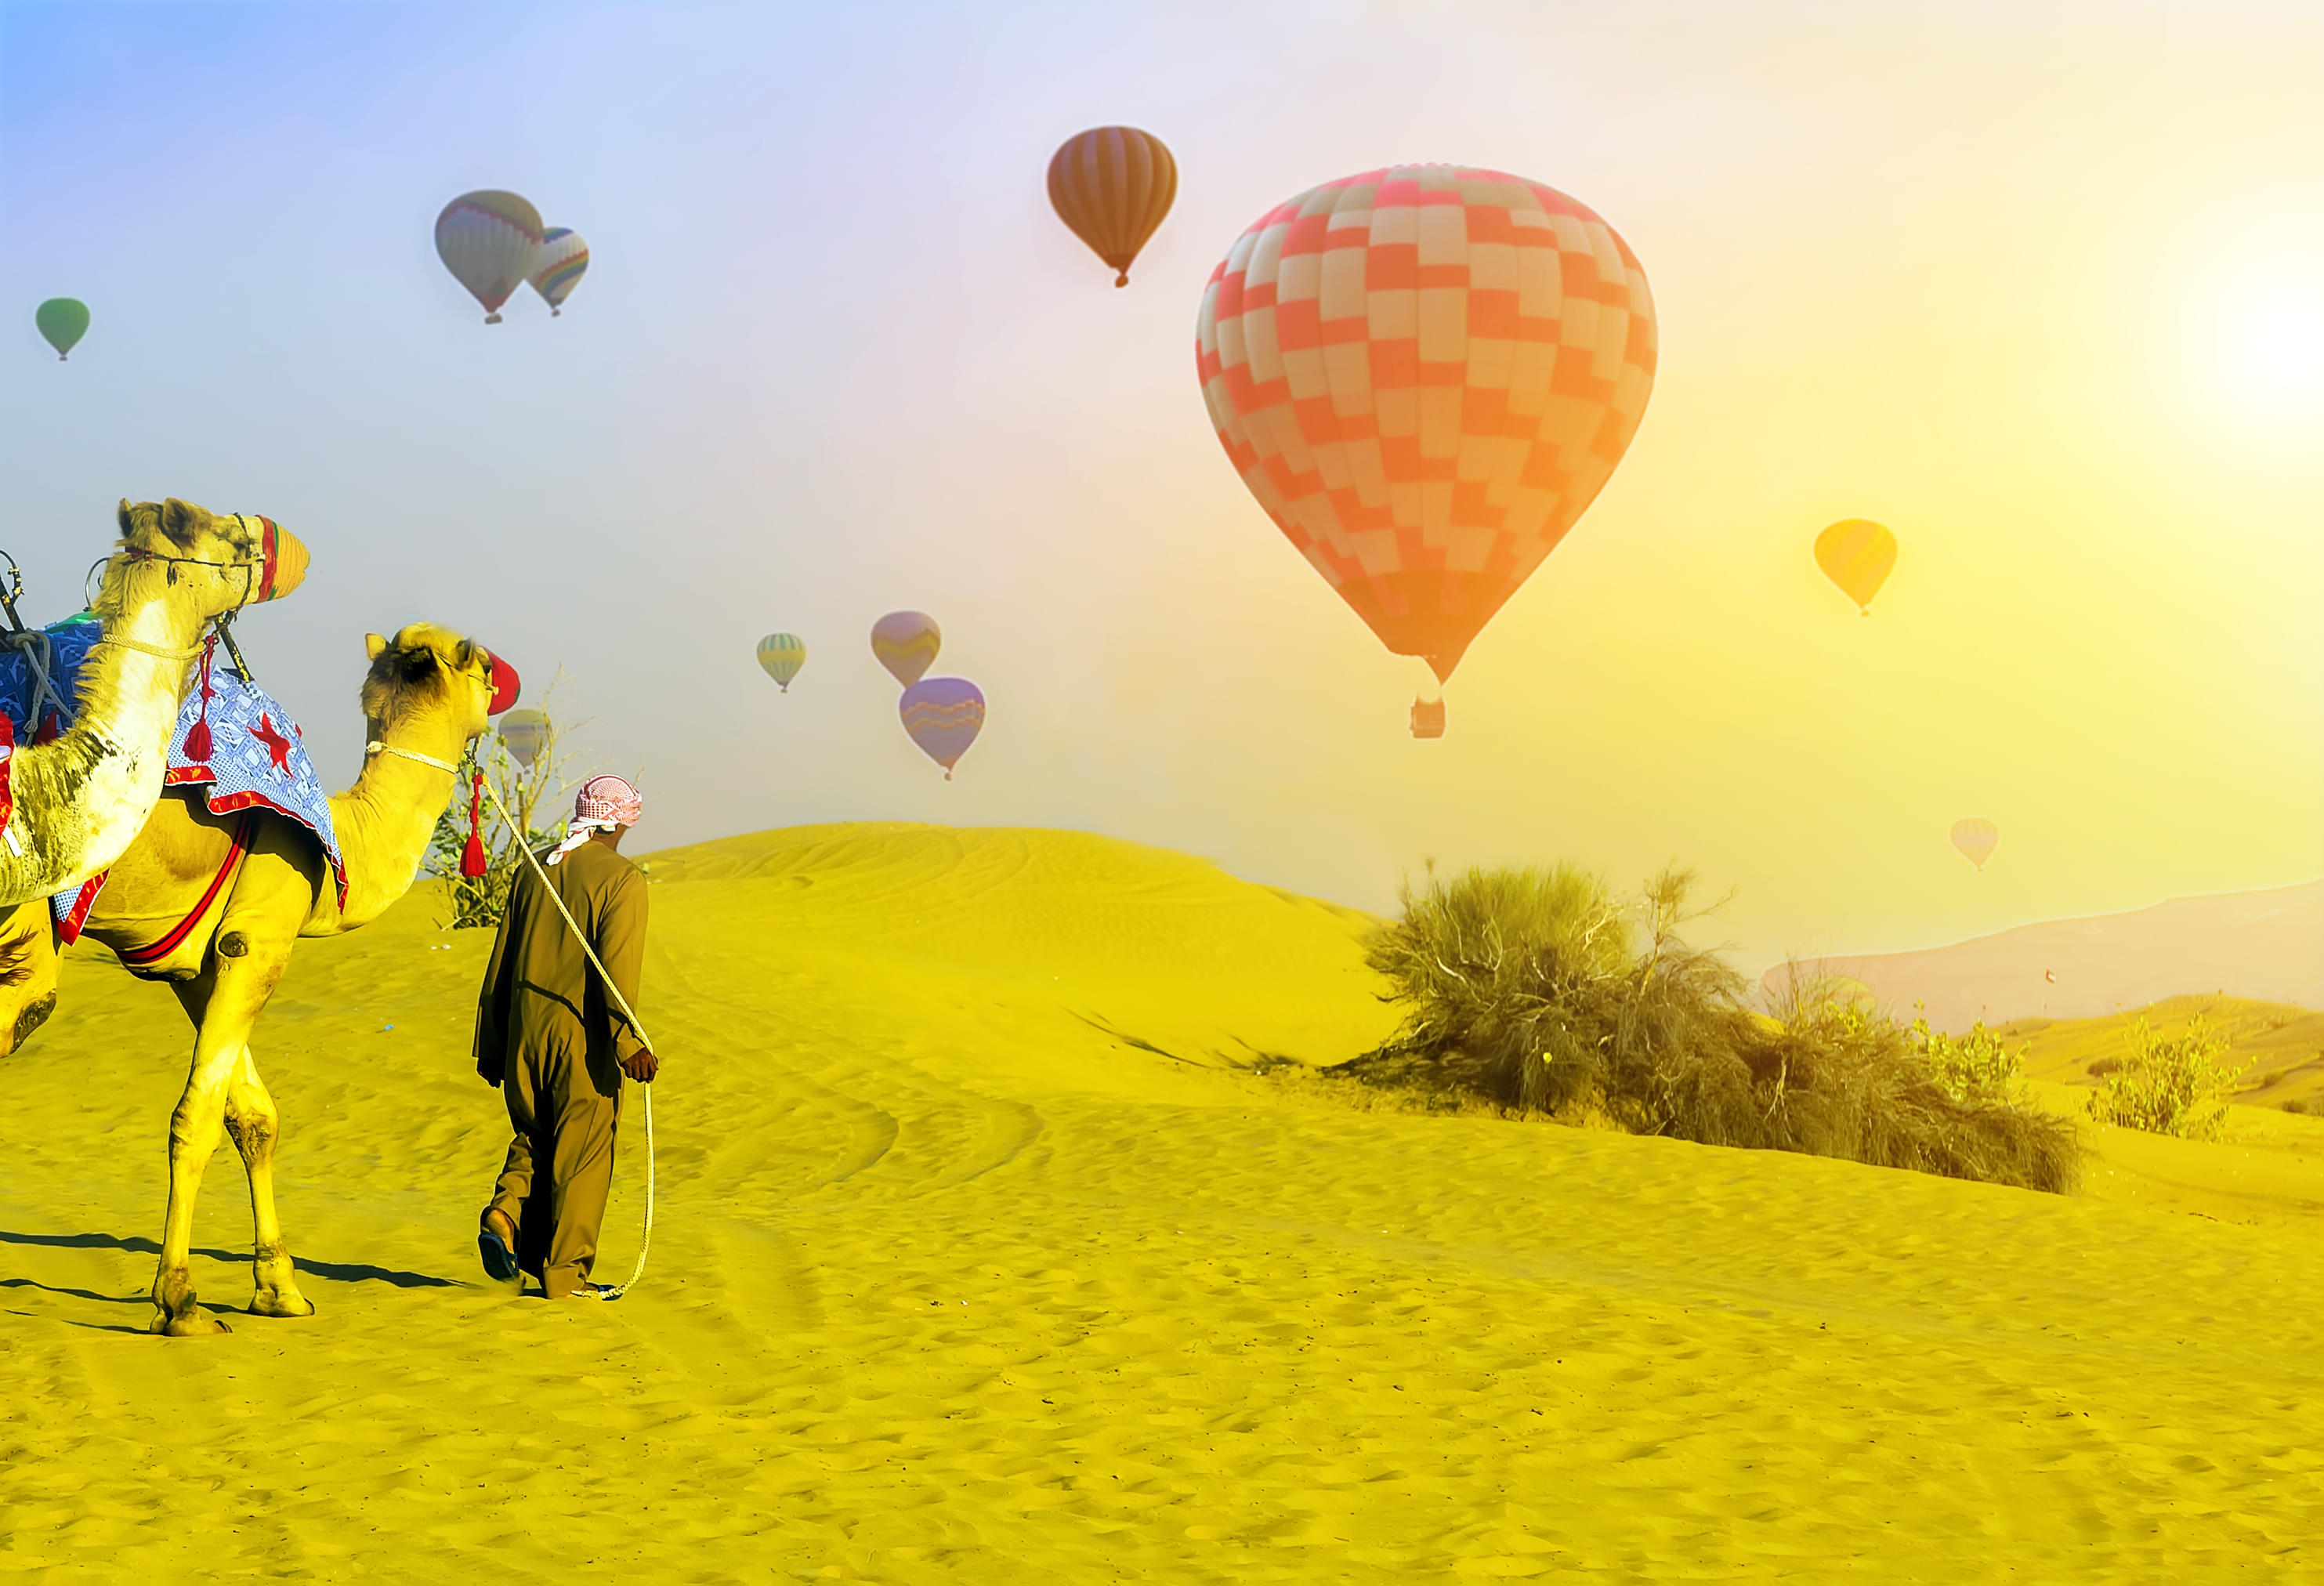 View of Hot Air balloons with Camel Ride in Bright Sunny Day